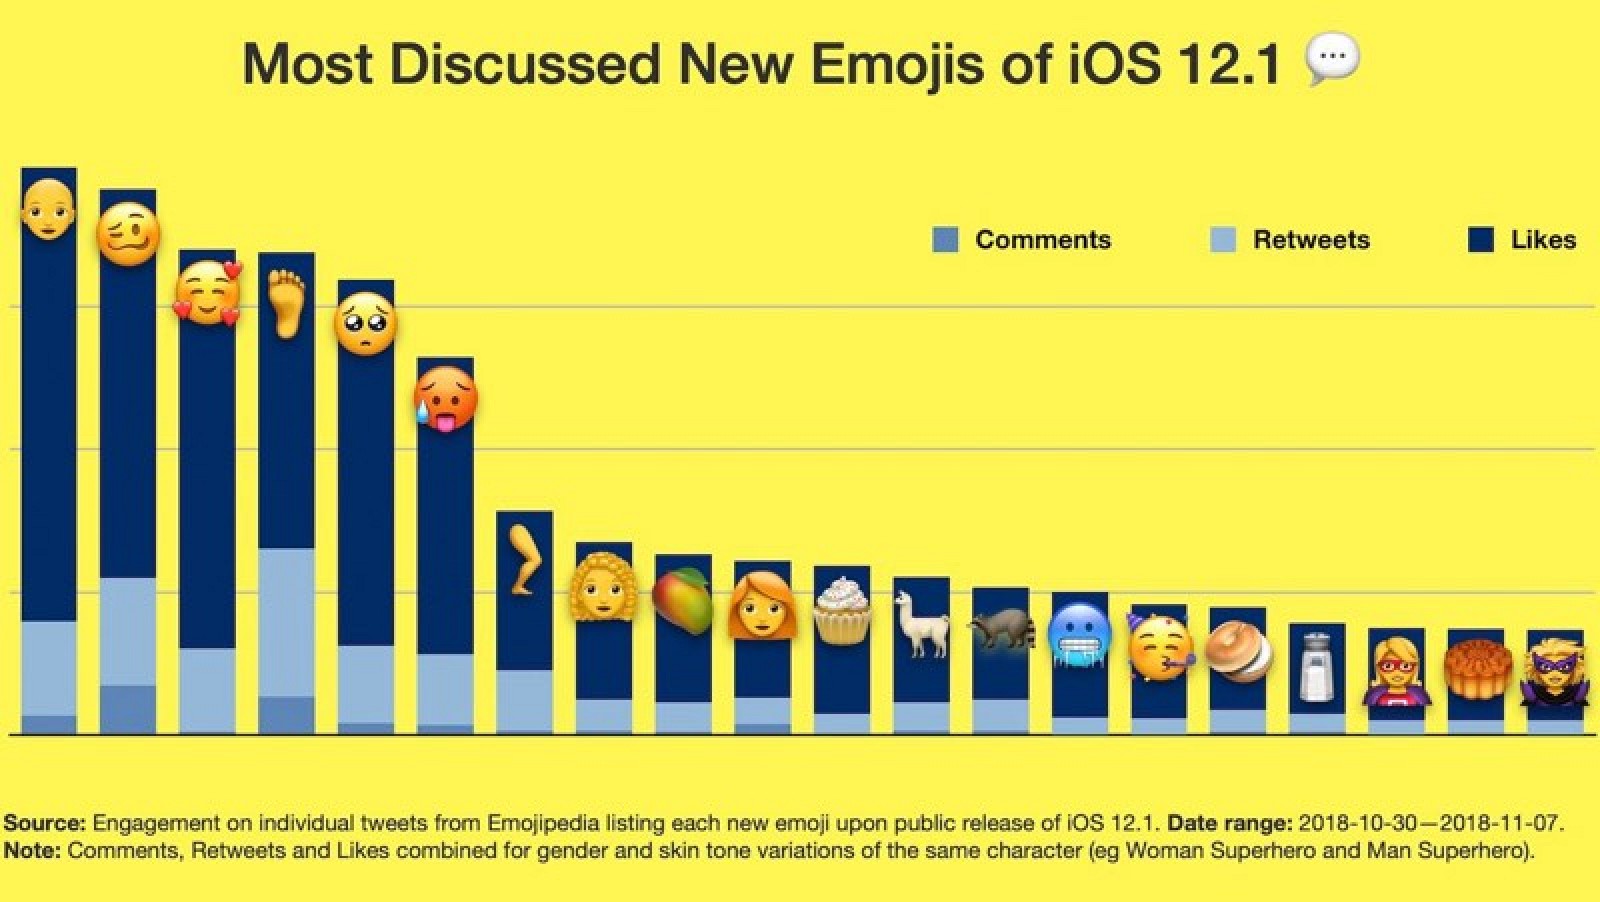 photo of Woozy Face, Bald Person, Face With 3 Hearts and Foot Among Most Discussed New Emoji in iOS 12.1 image